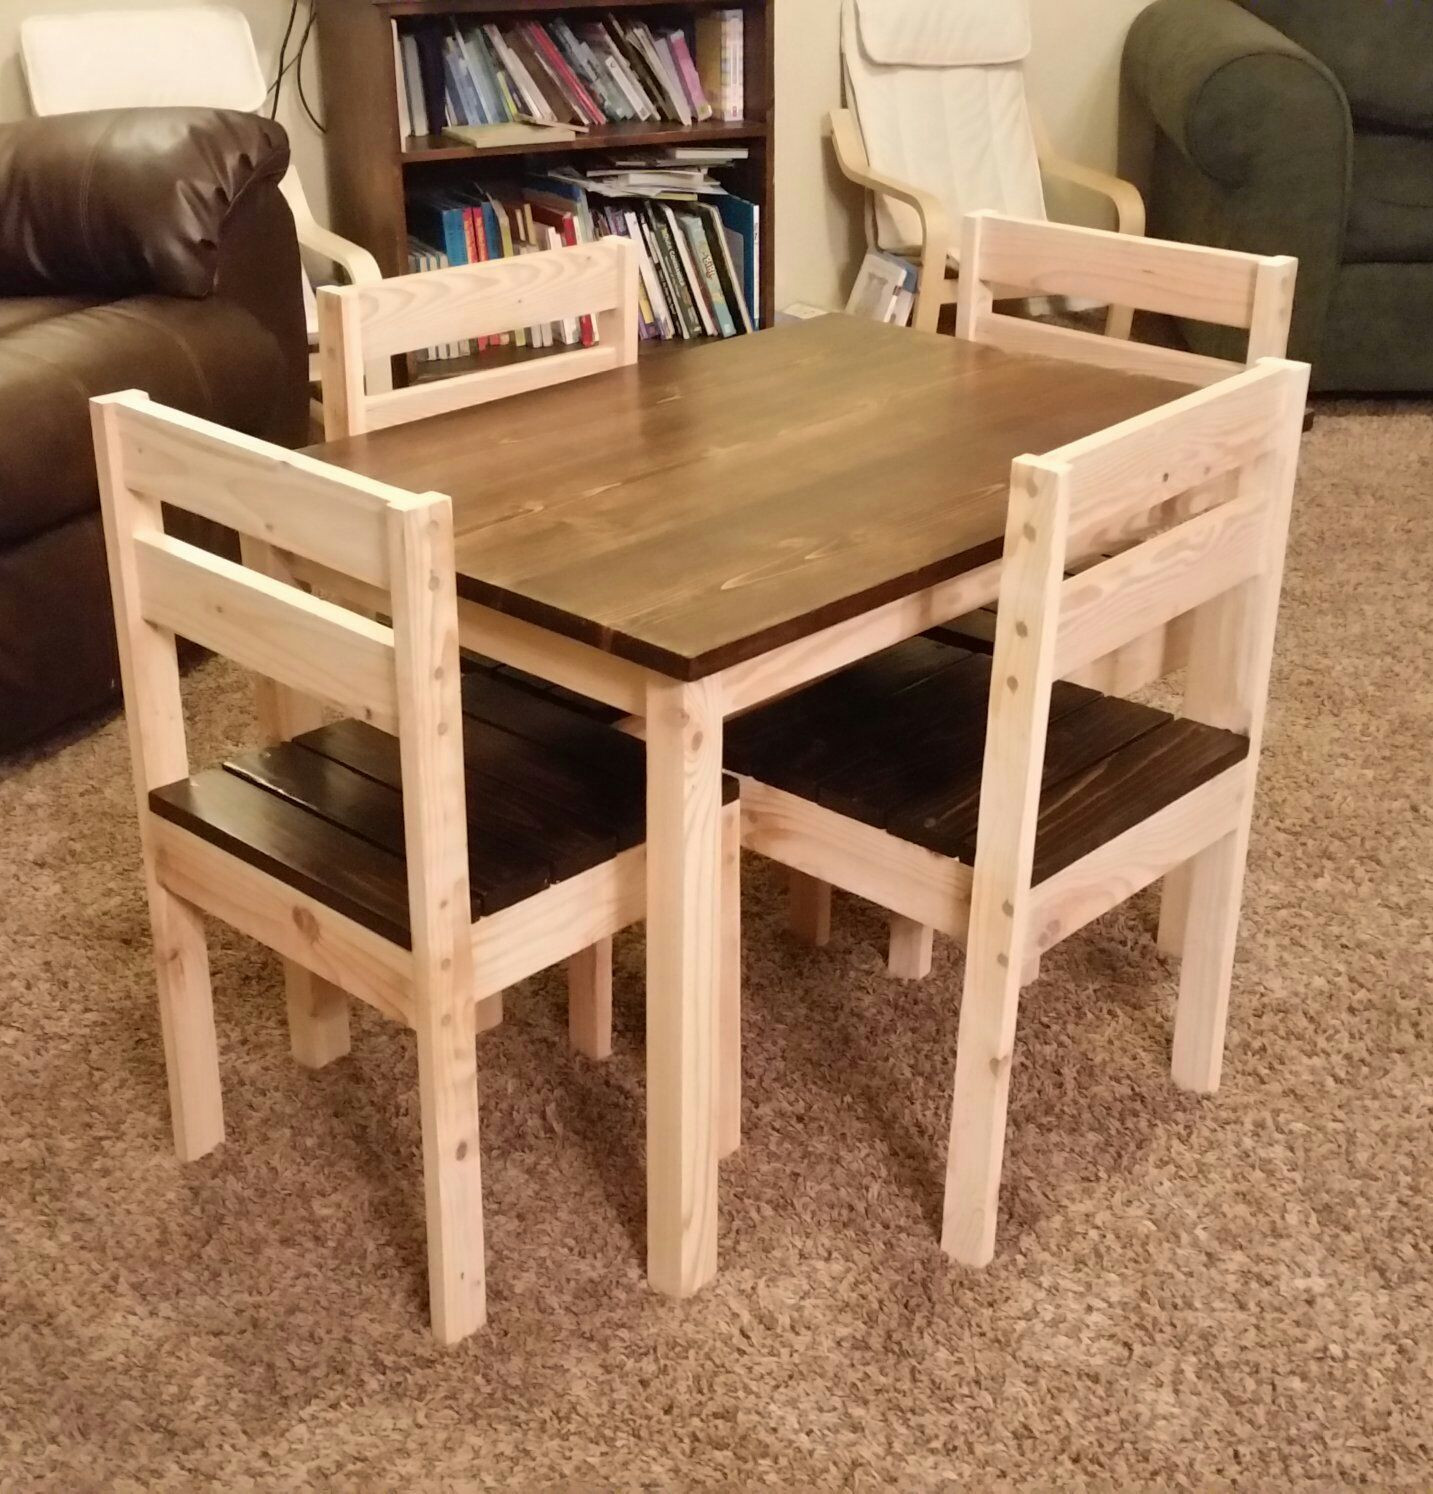 DIY Kids Chair
 Kids table and chairs